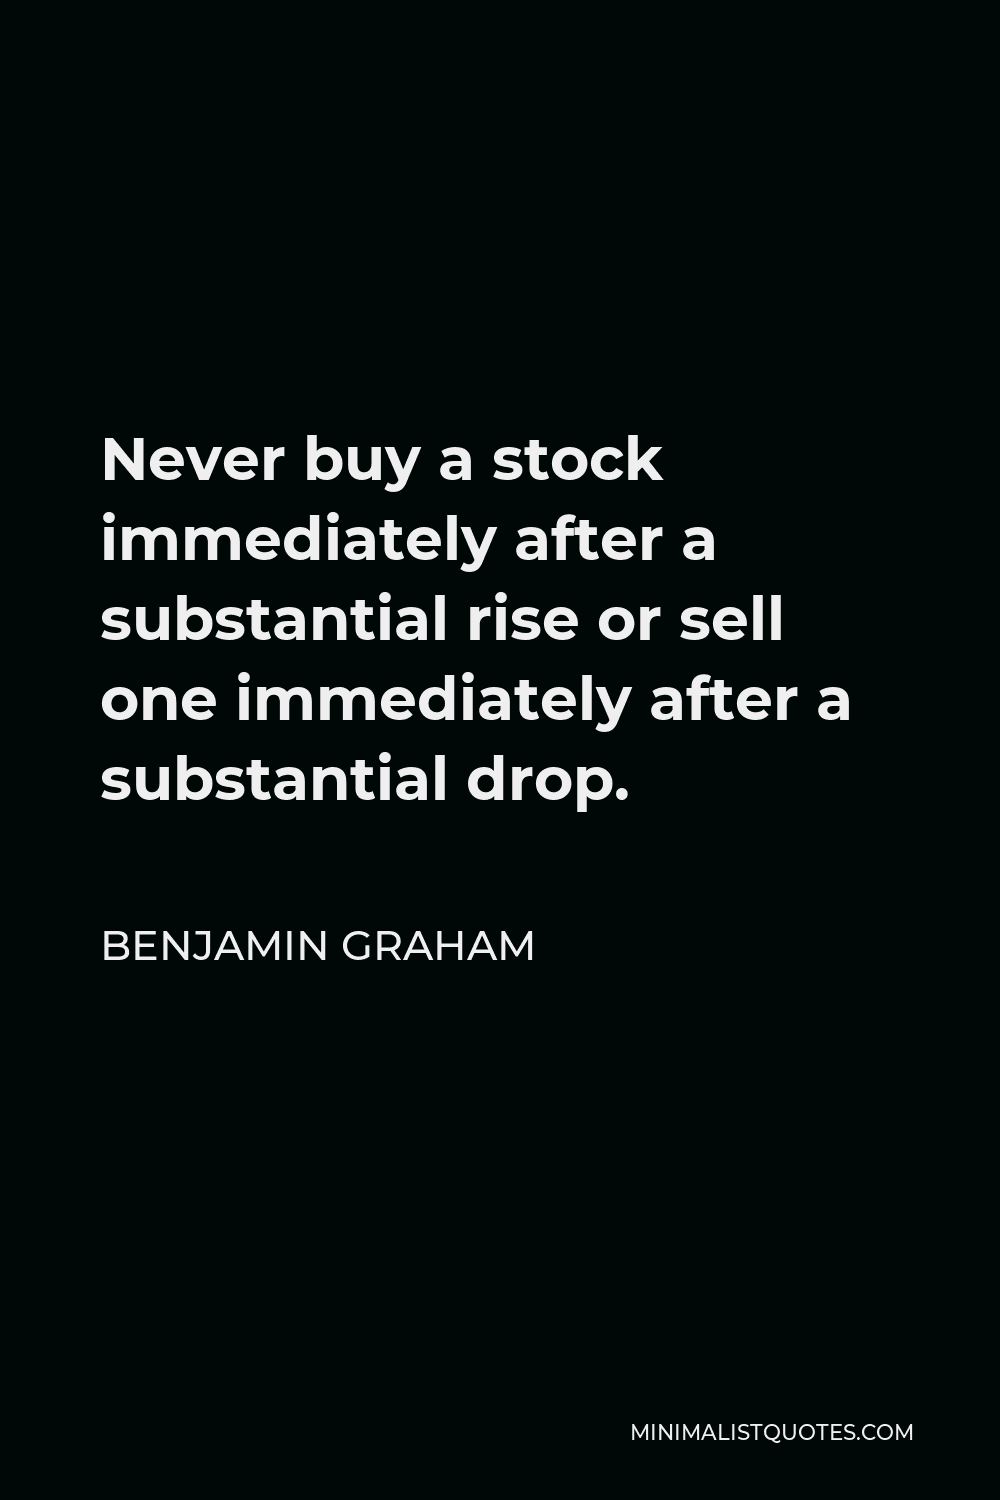 Benjamin Graham Quote - Never buy a stock immediately after a substantial rise or sell one immediately after a substantial drop.